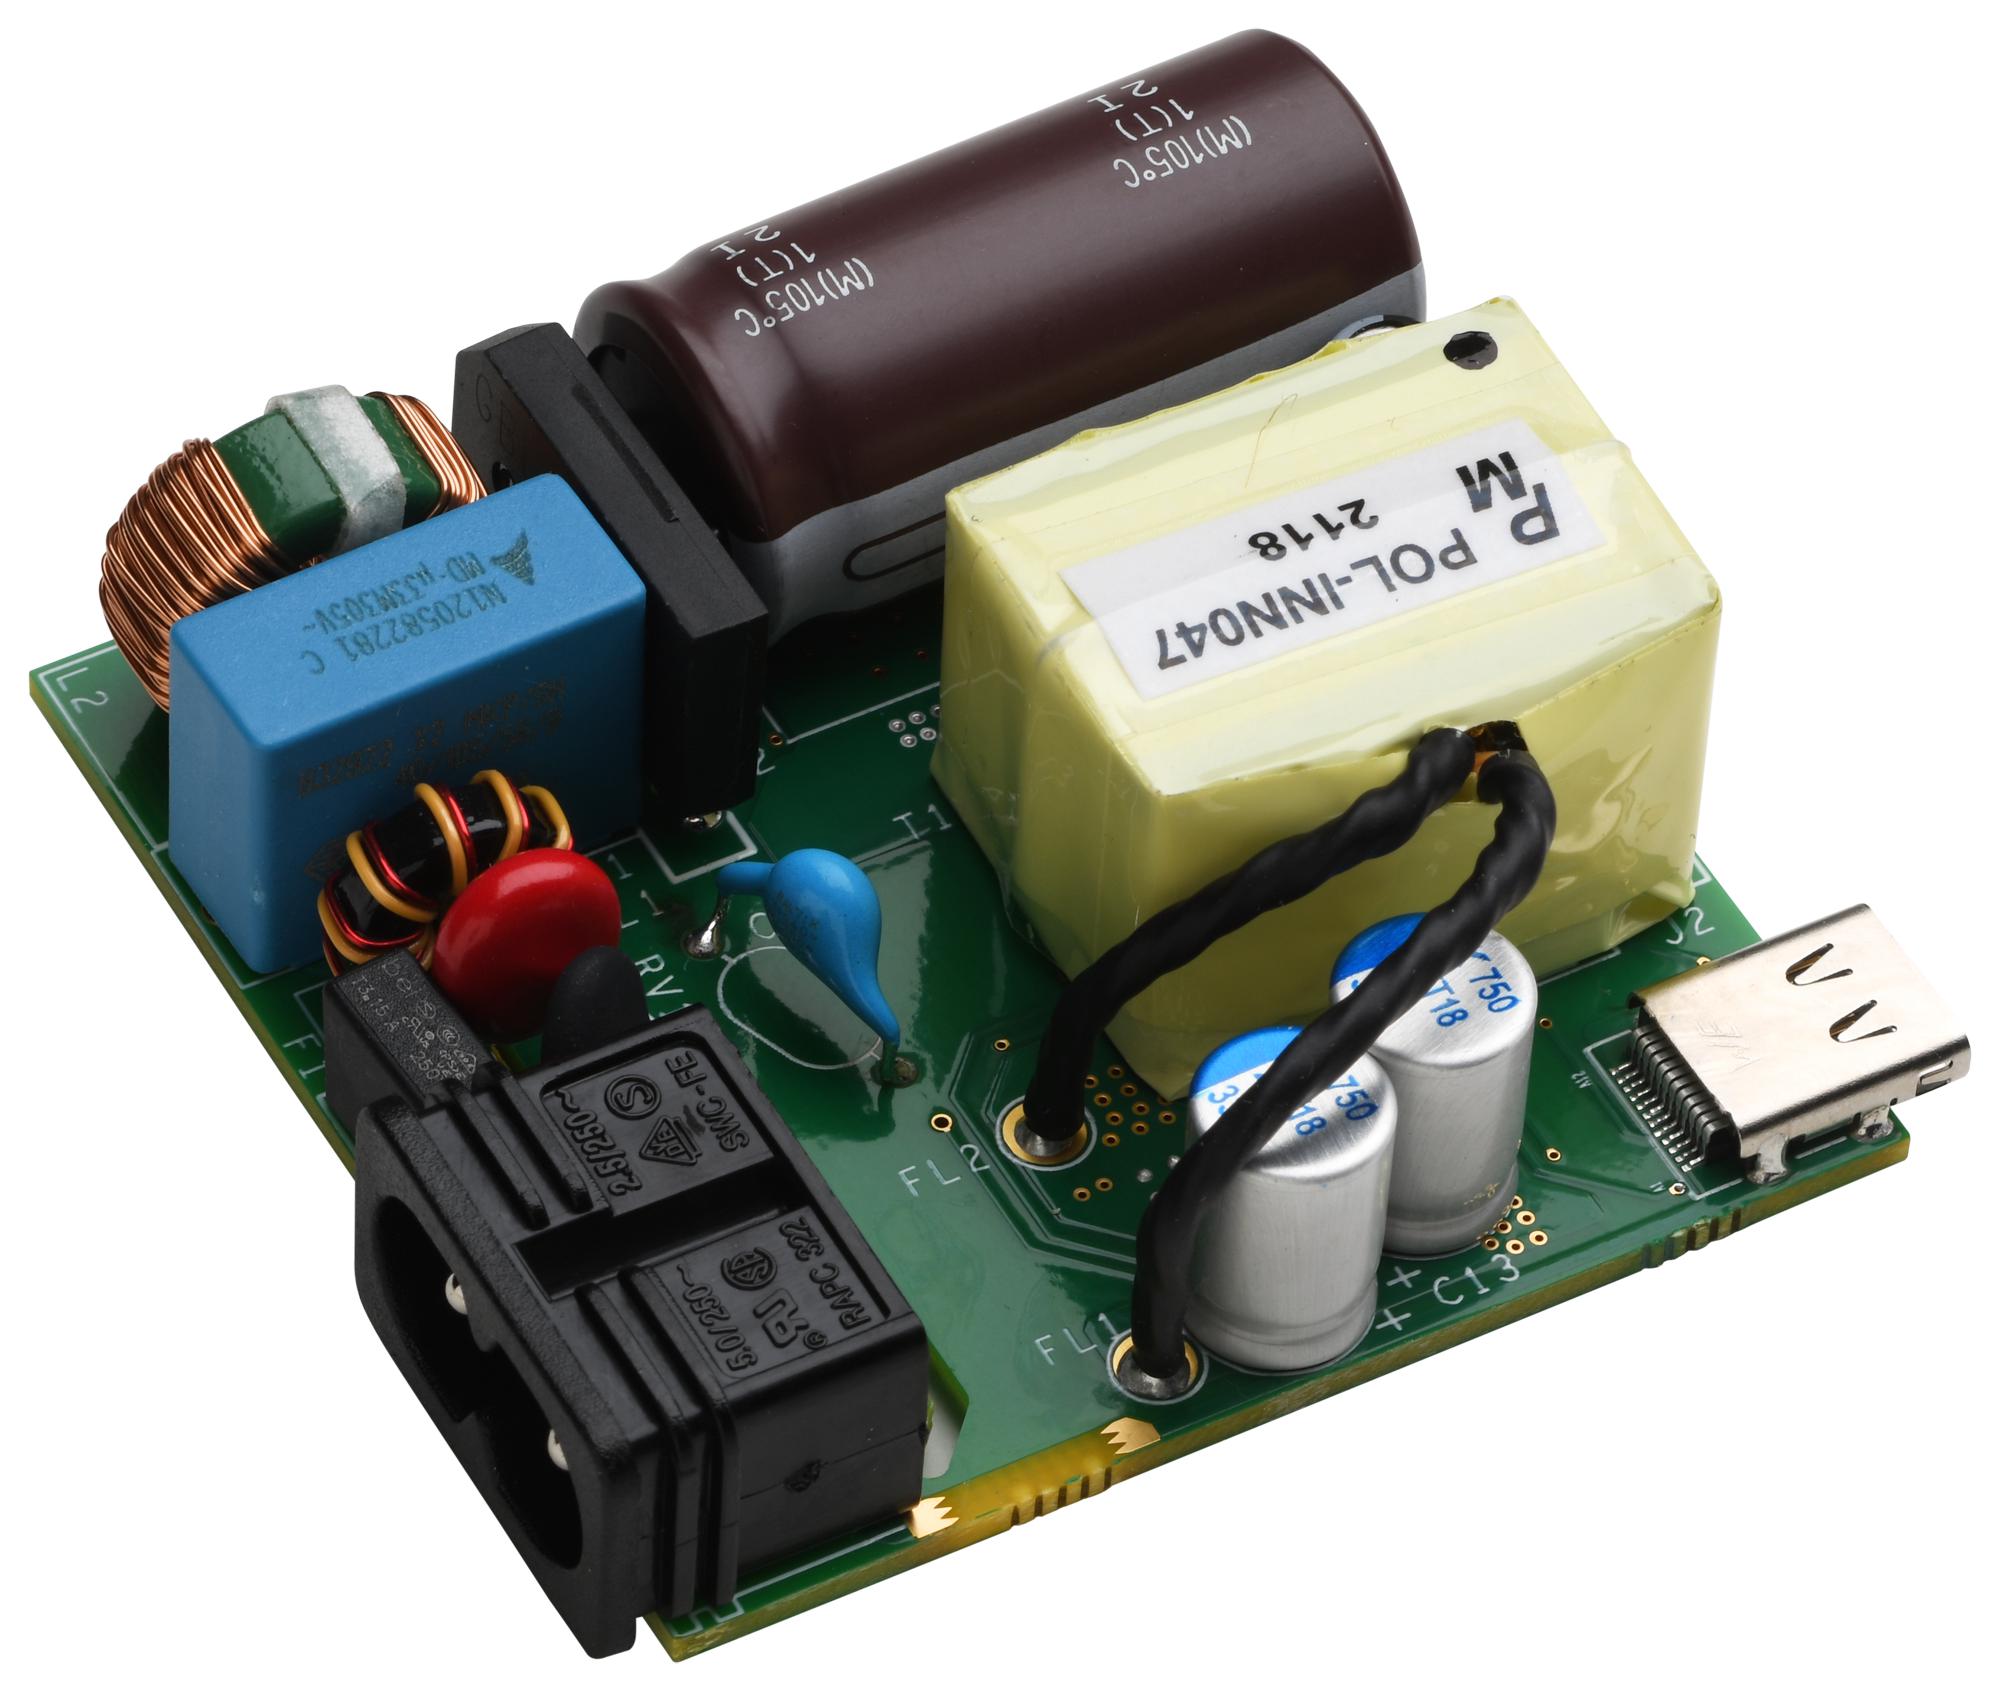 RDK-838 REFERENCE DESIGN BOARD, USB PD CONTR POWER INTEGRATIONS